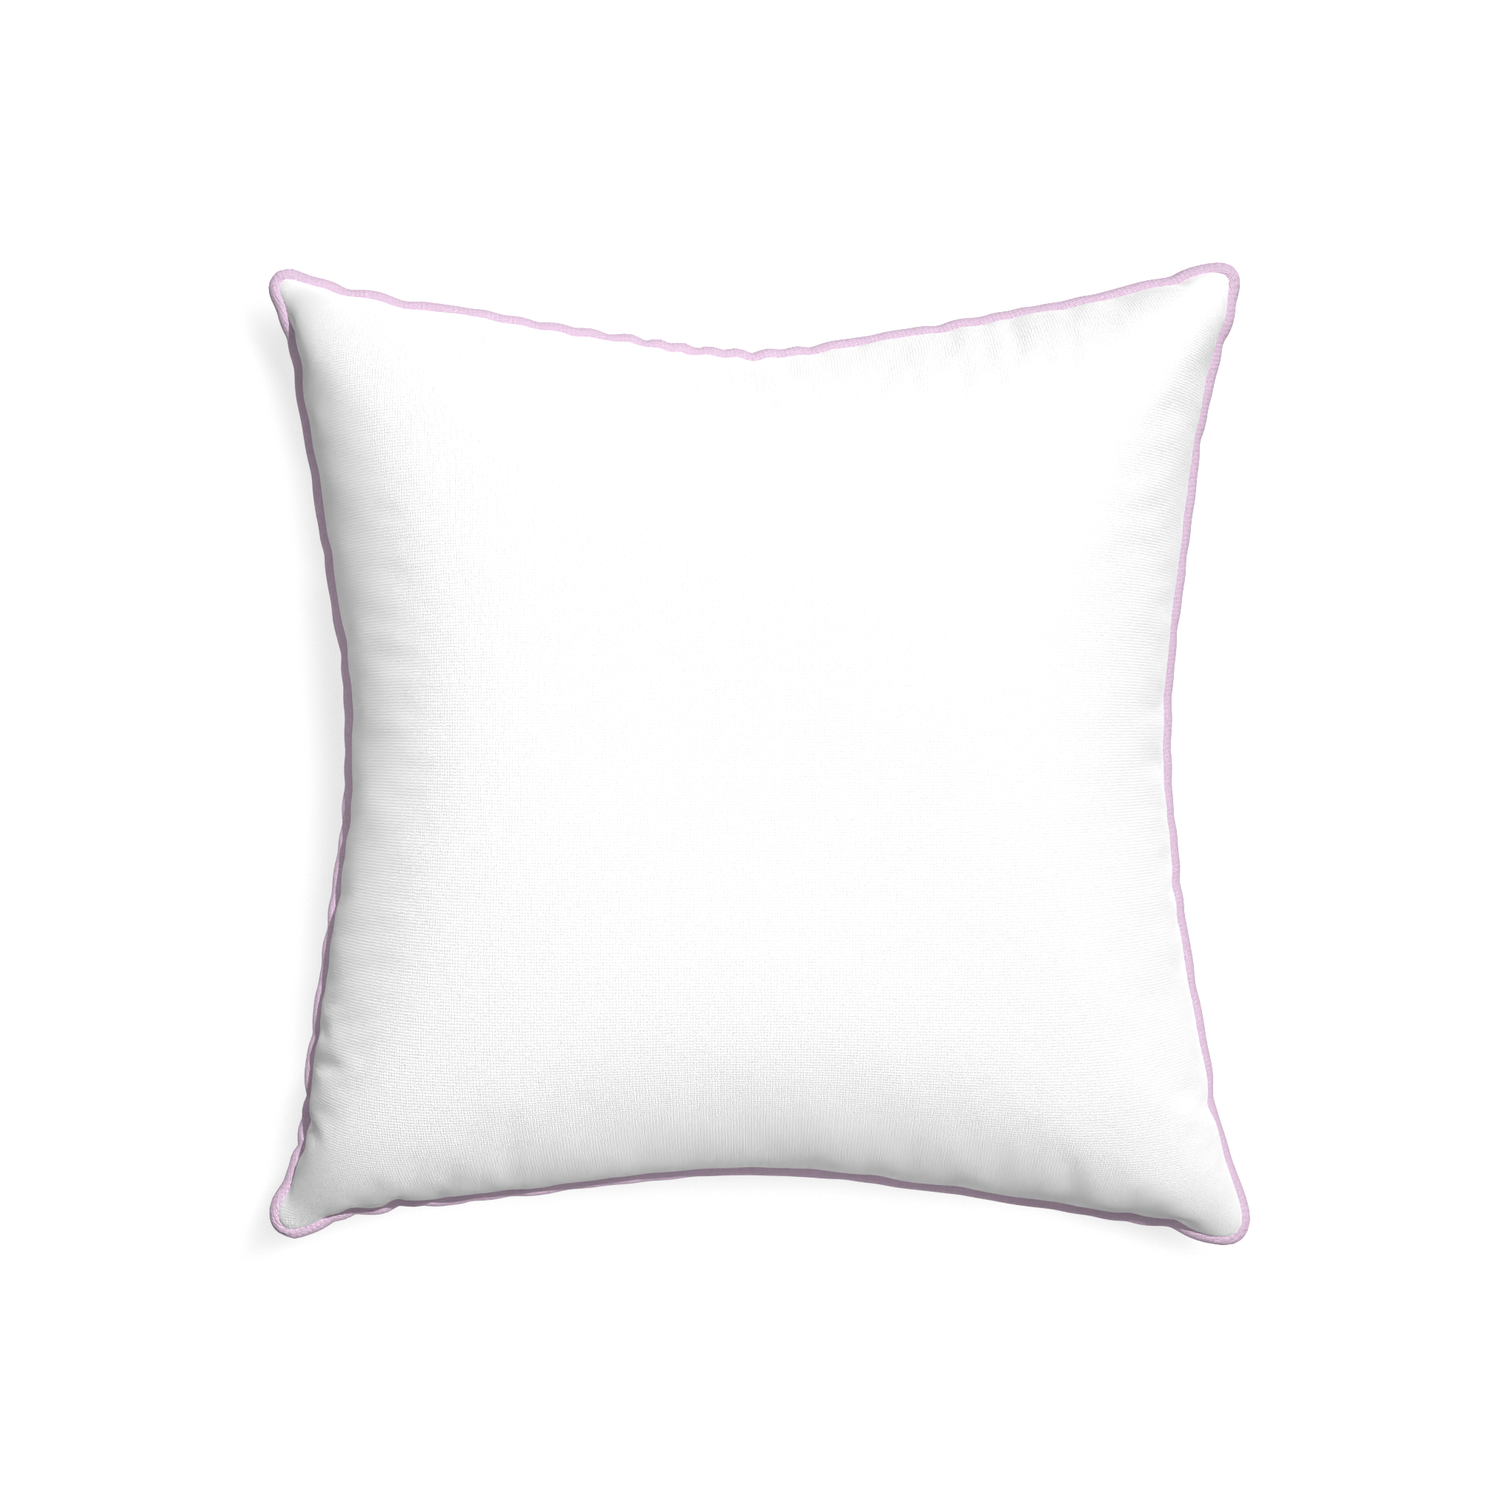 22-square snow custom pillow with l piping on white background